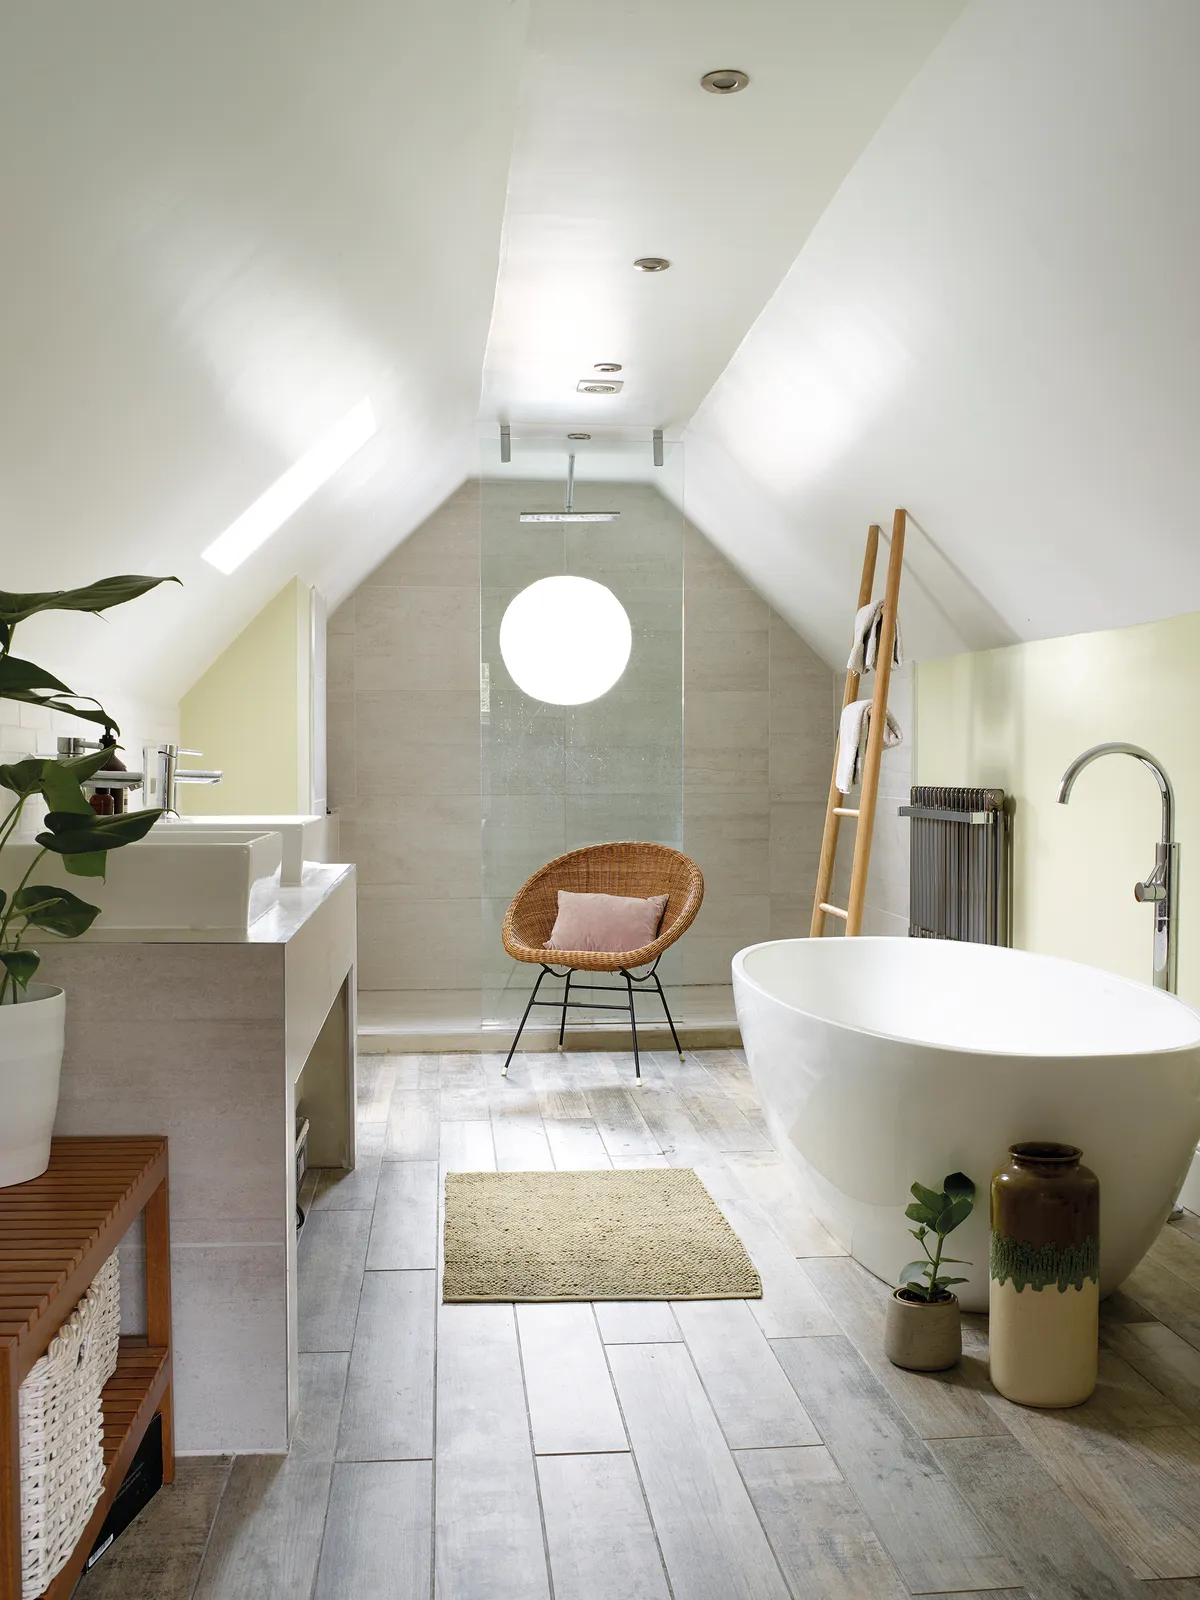 ‘It’s an indulgent use of space, but I love our bathroom – it’s my sanctuary’